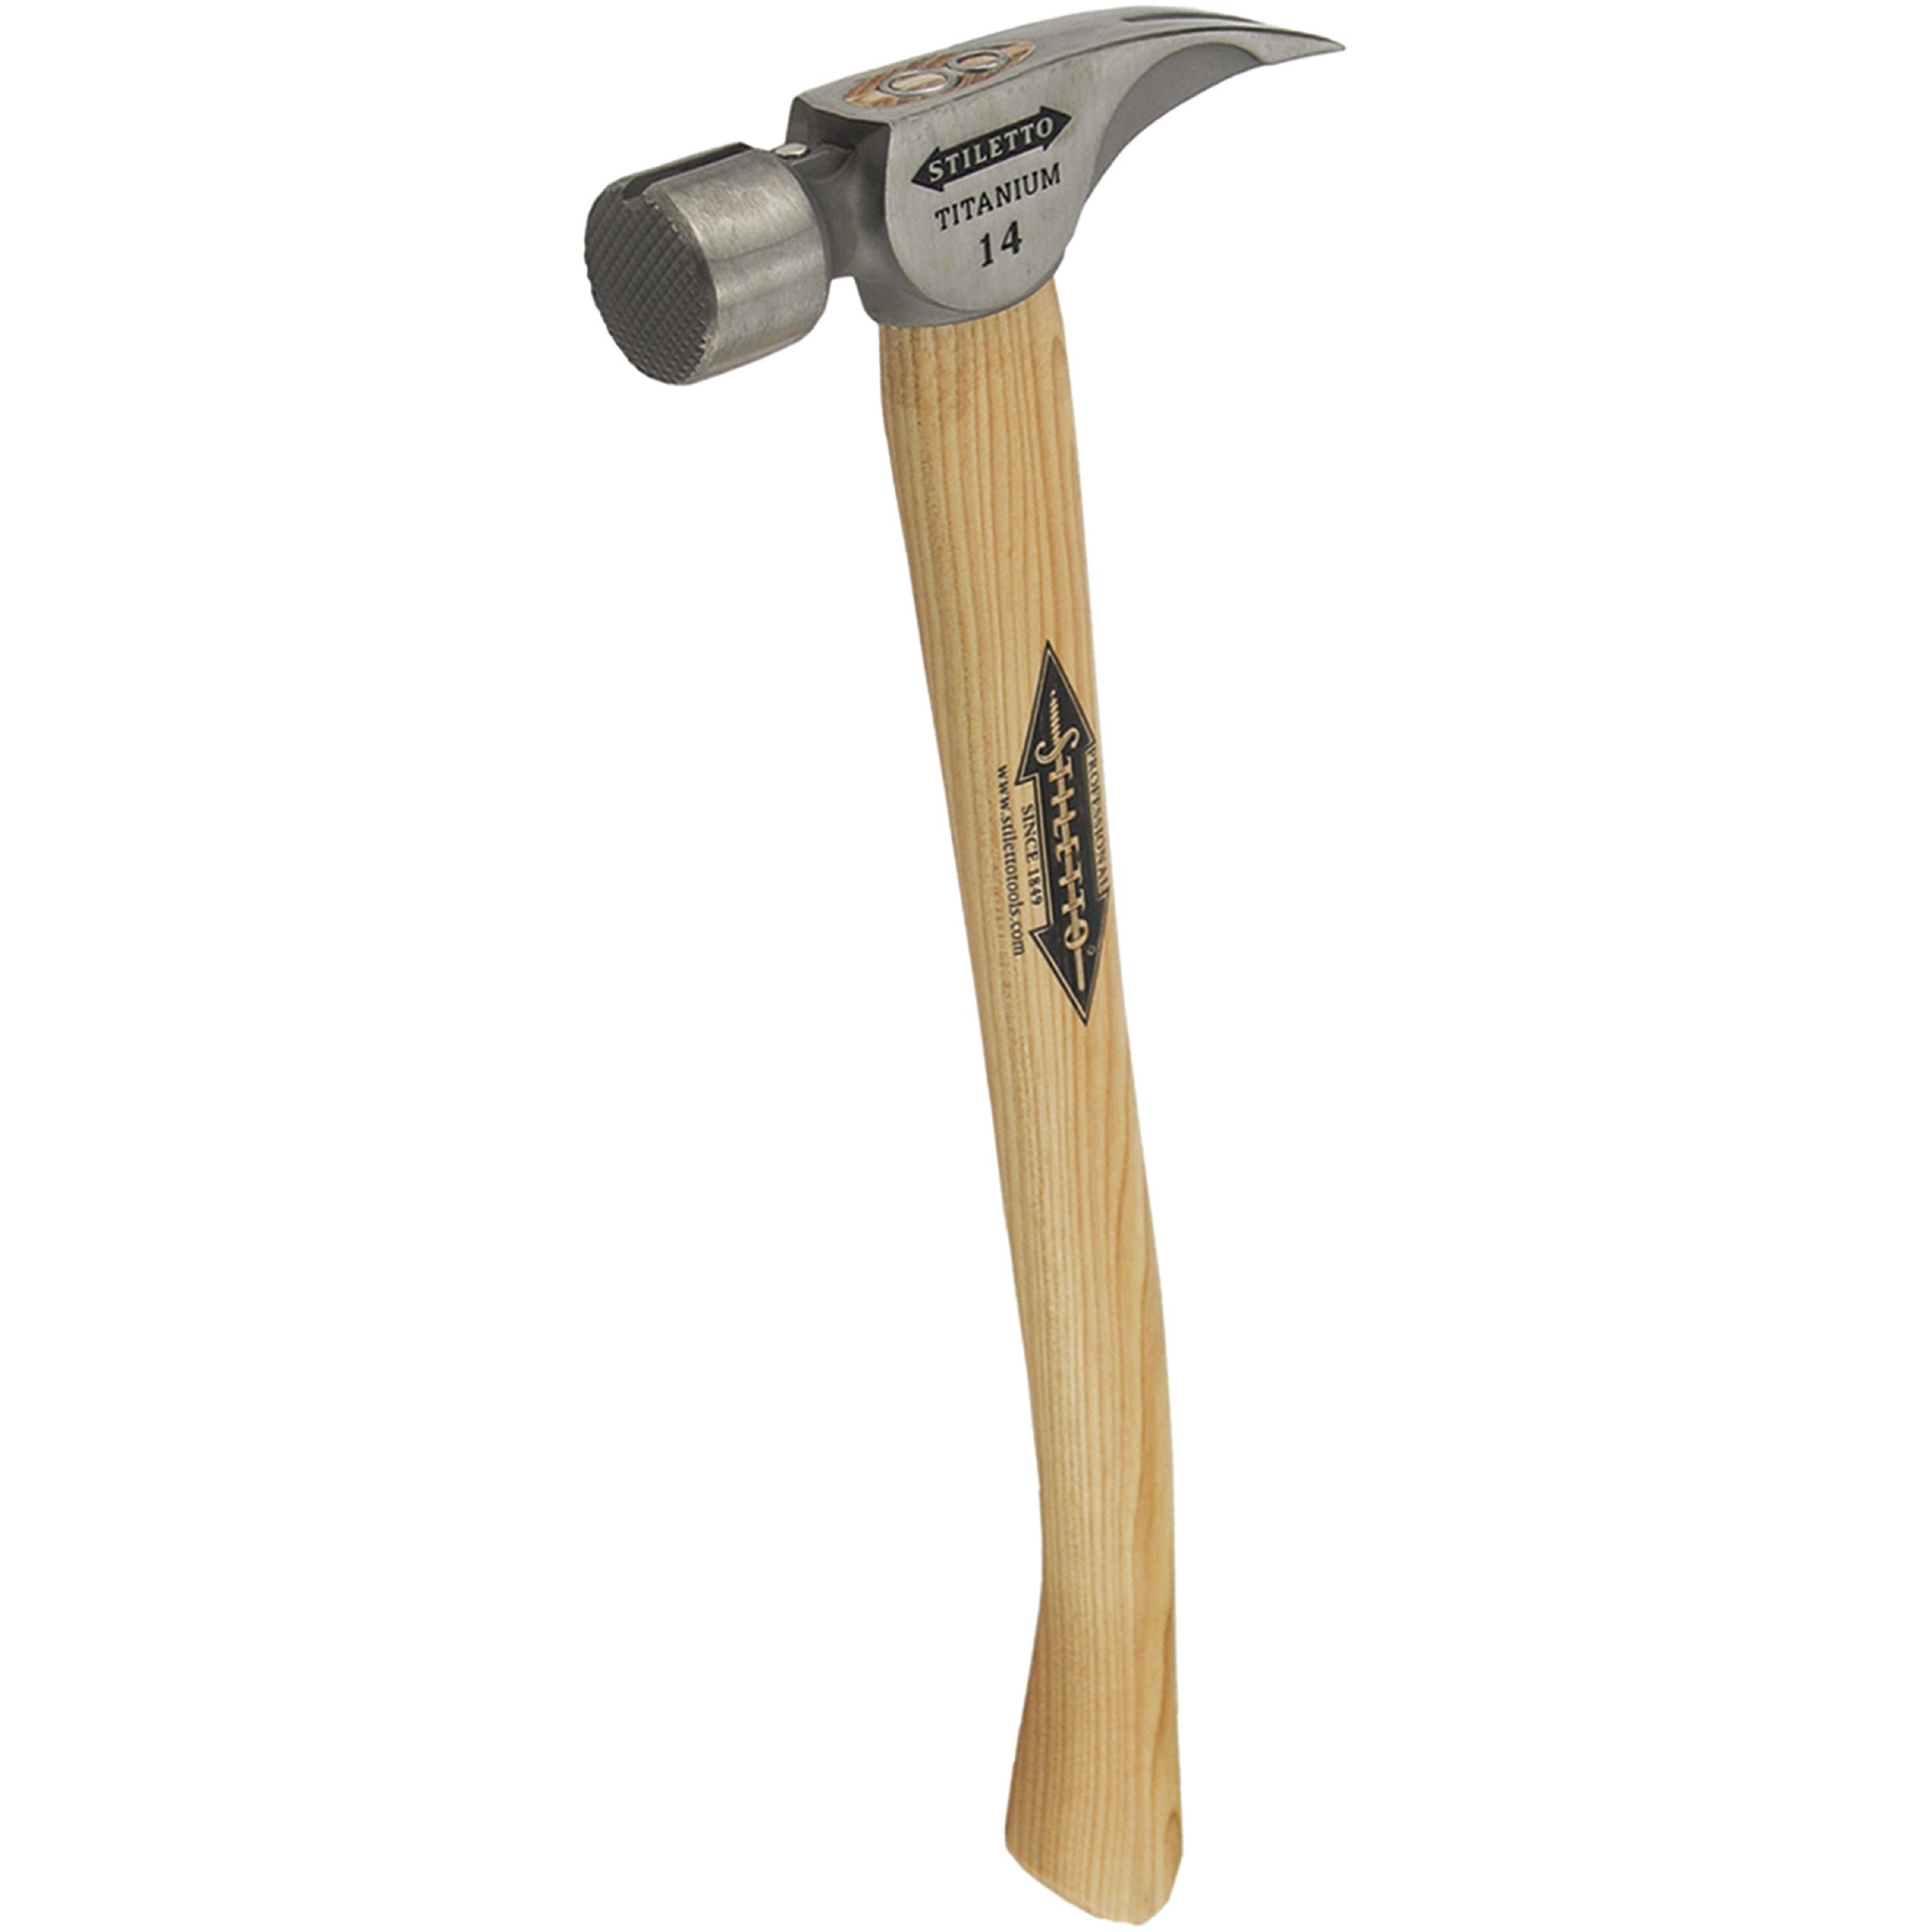 Titanium Hammer  HART Forged 11OZ  trimmer curved hickory handle